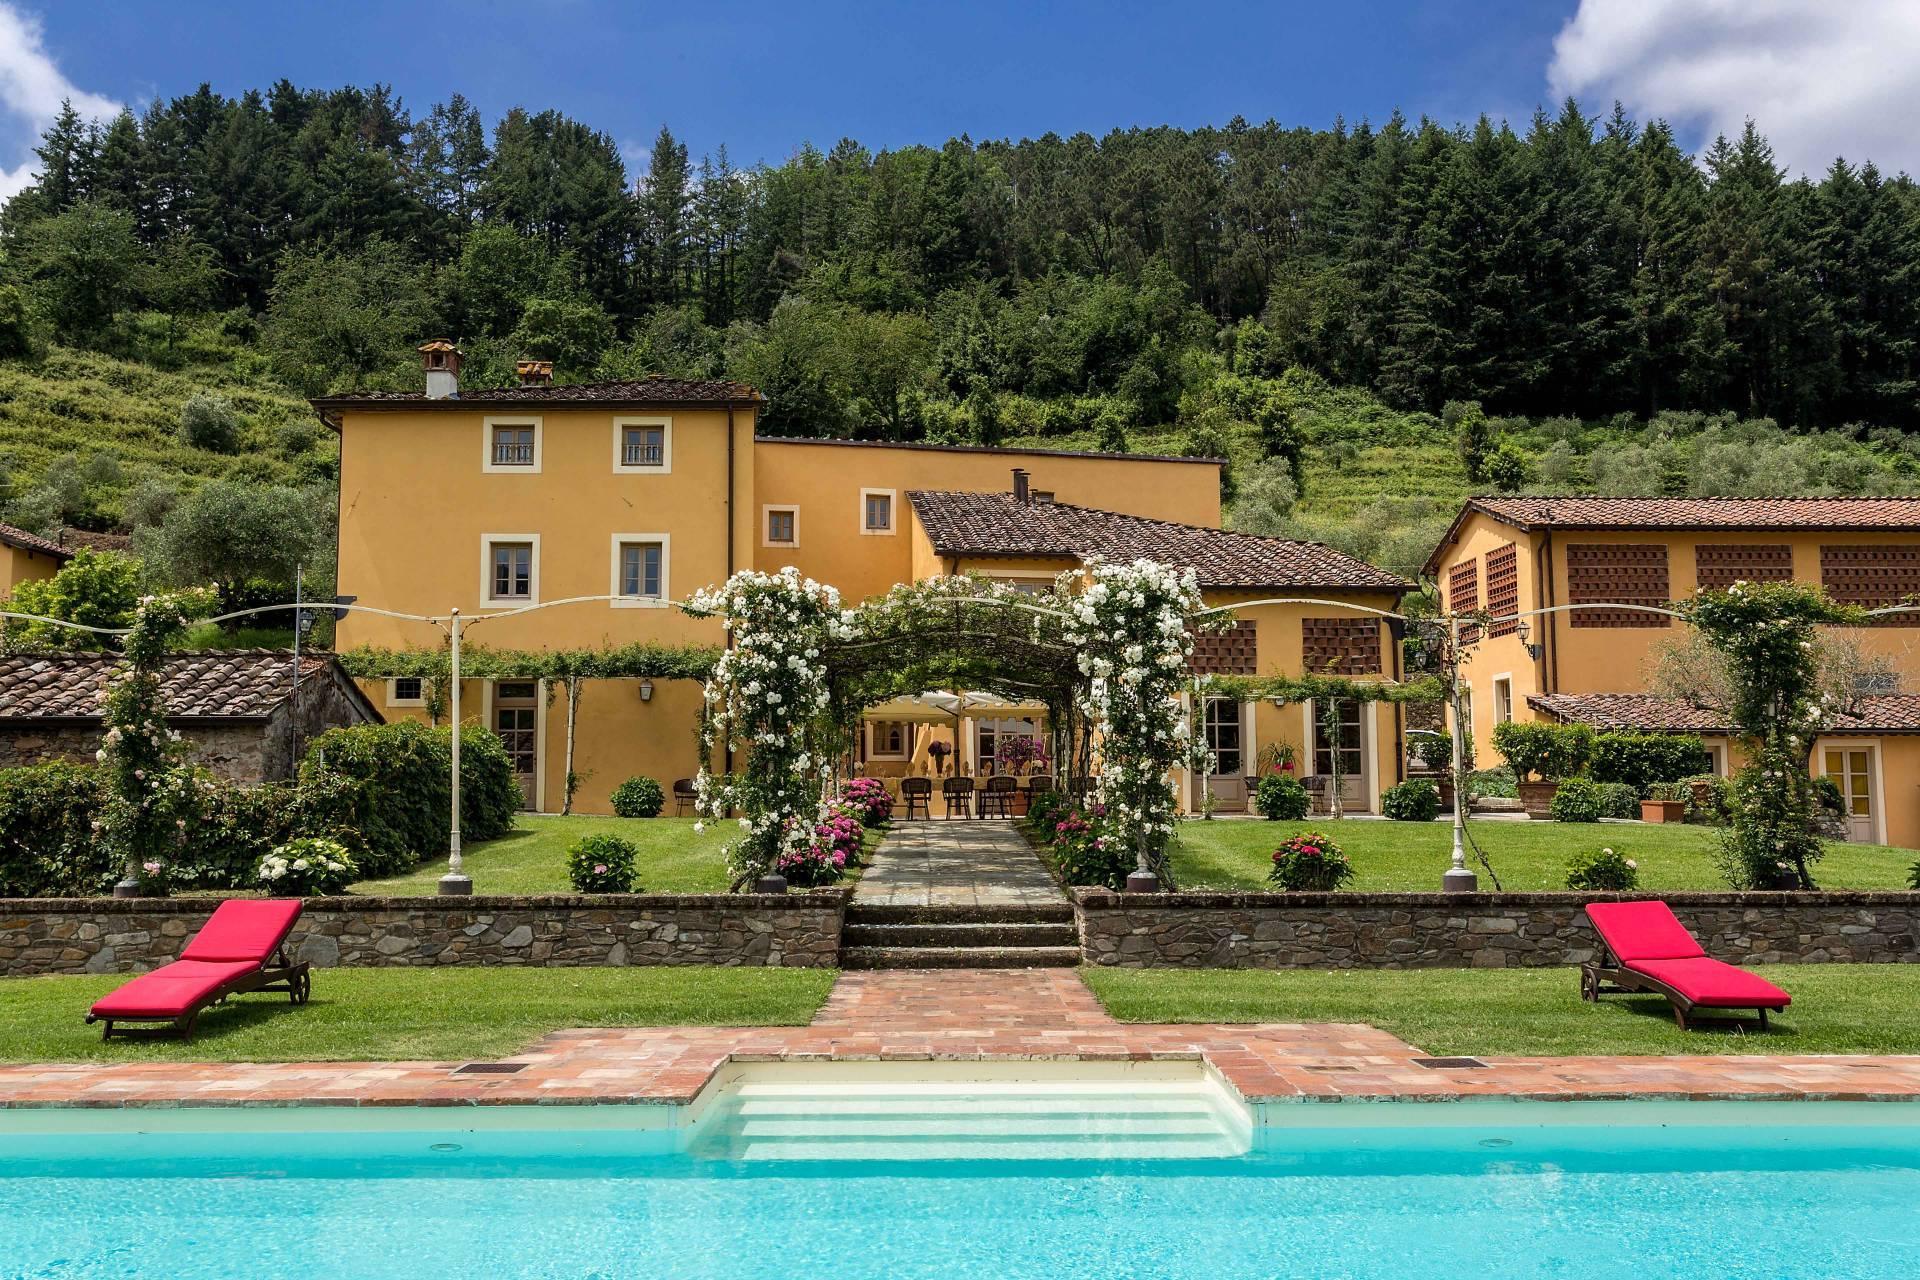 A traditional Tuscan countryhome in a poetic Italian setting - 2